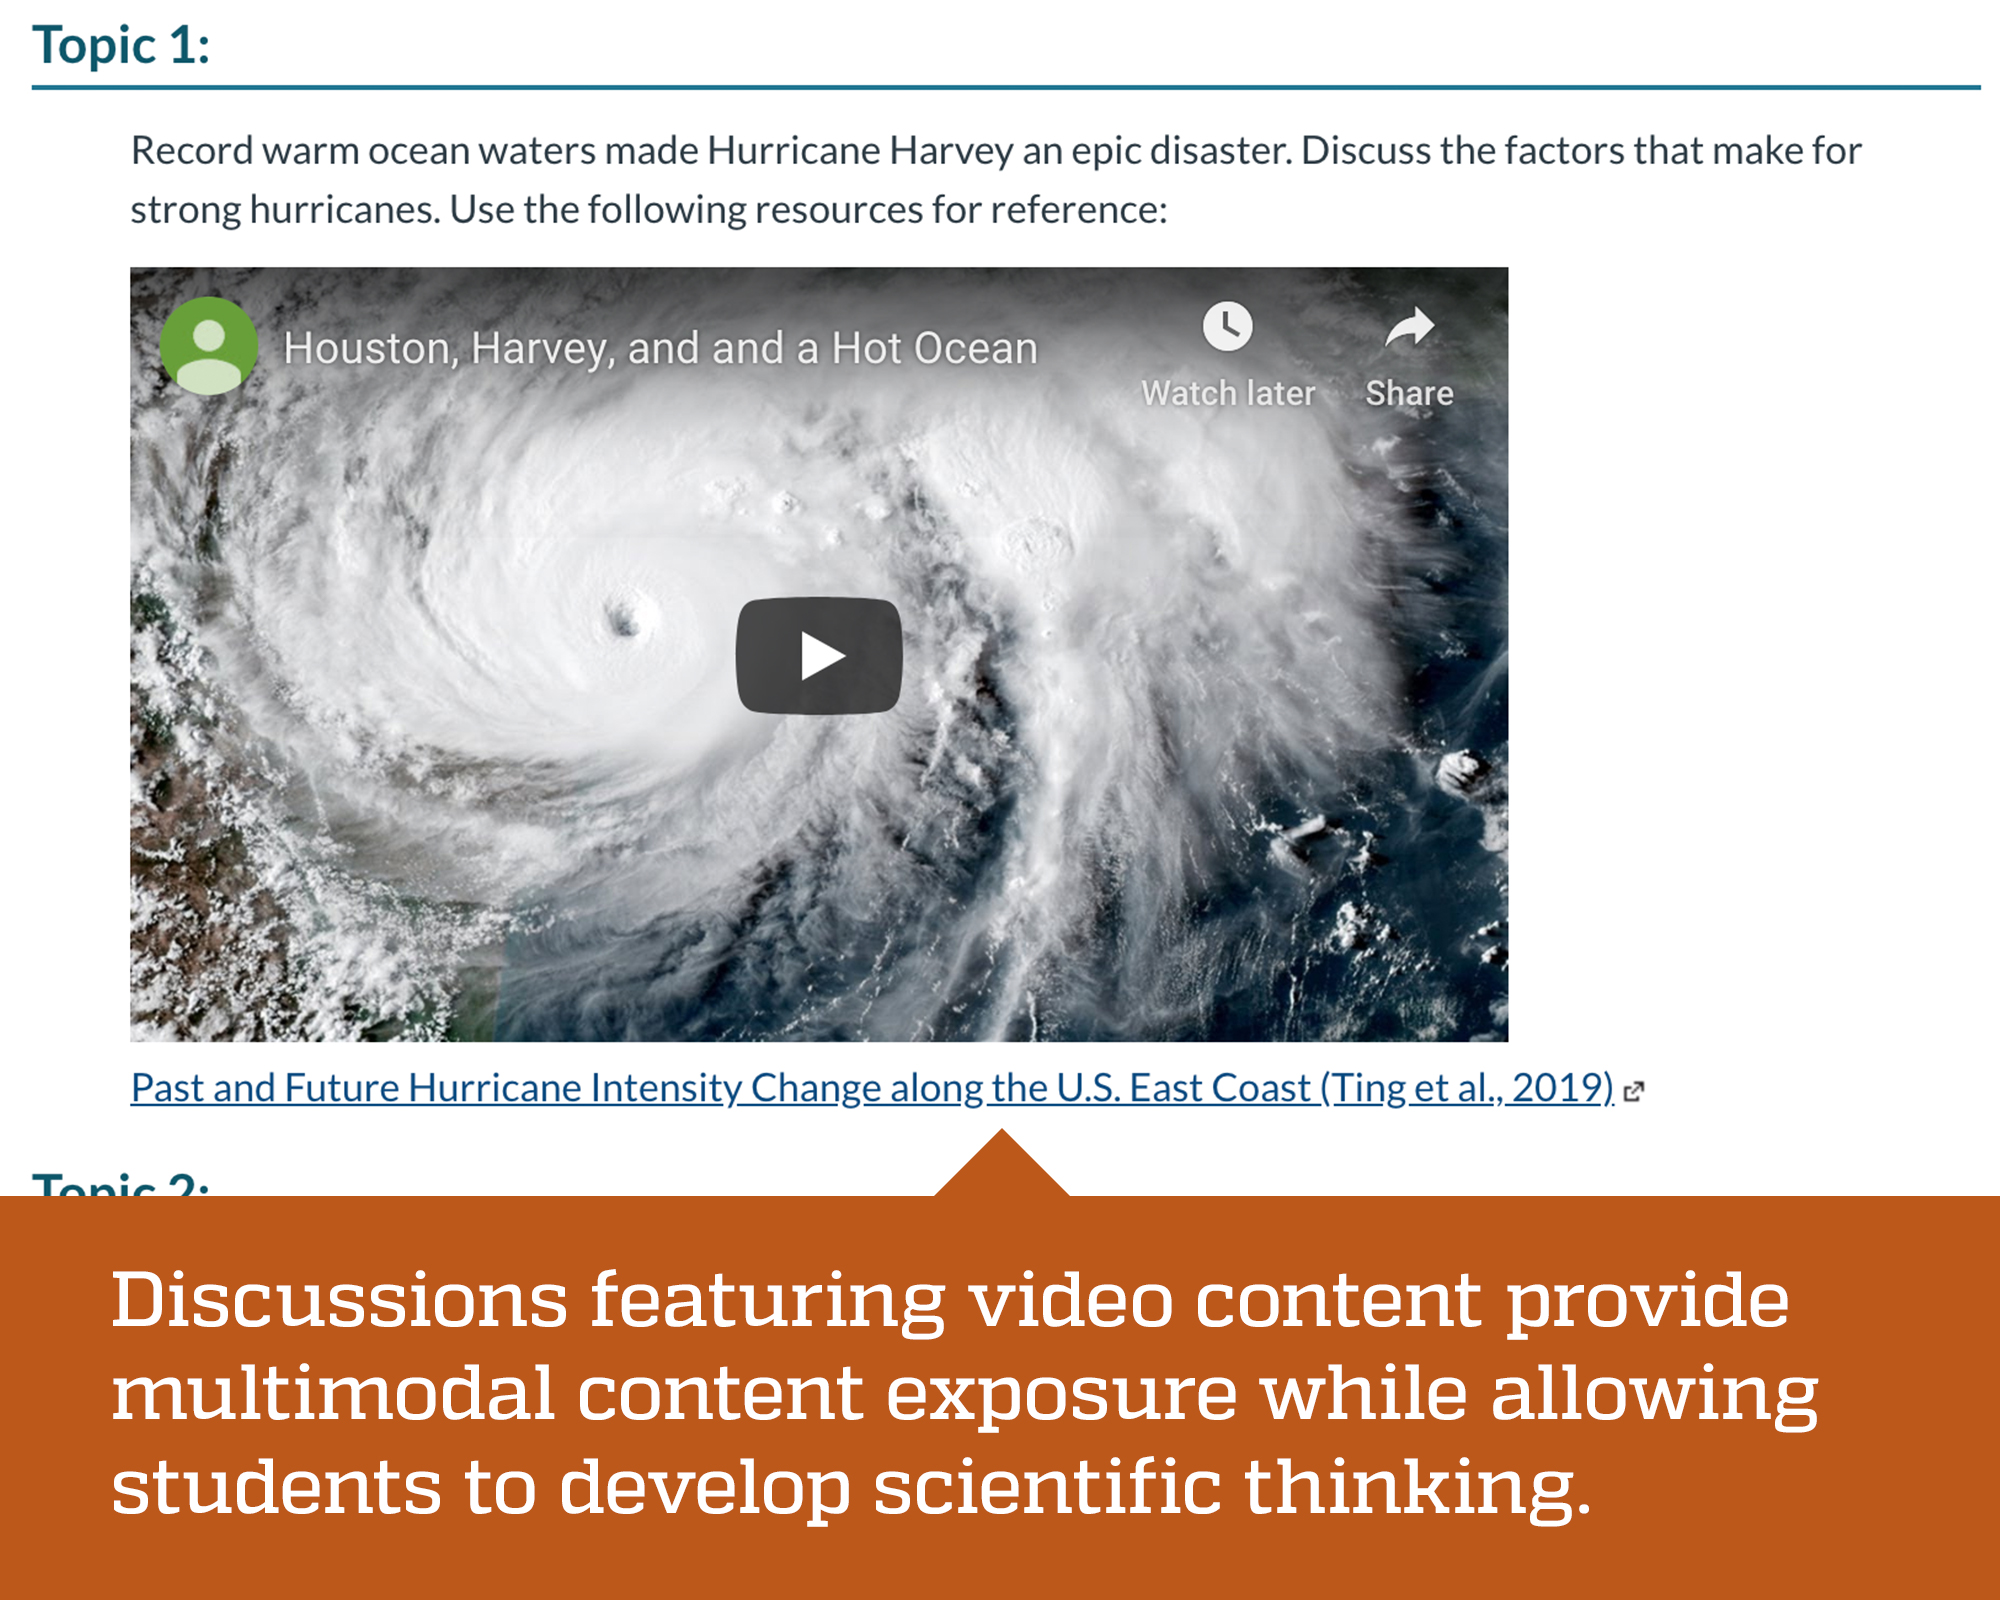 Screenshot of a course video on a course page designed by Center for Online Innovation and Production at University of Florida